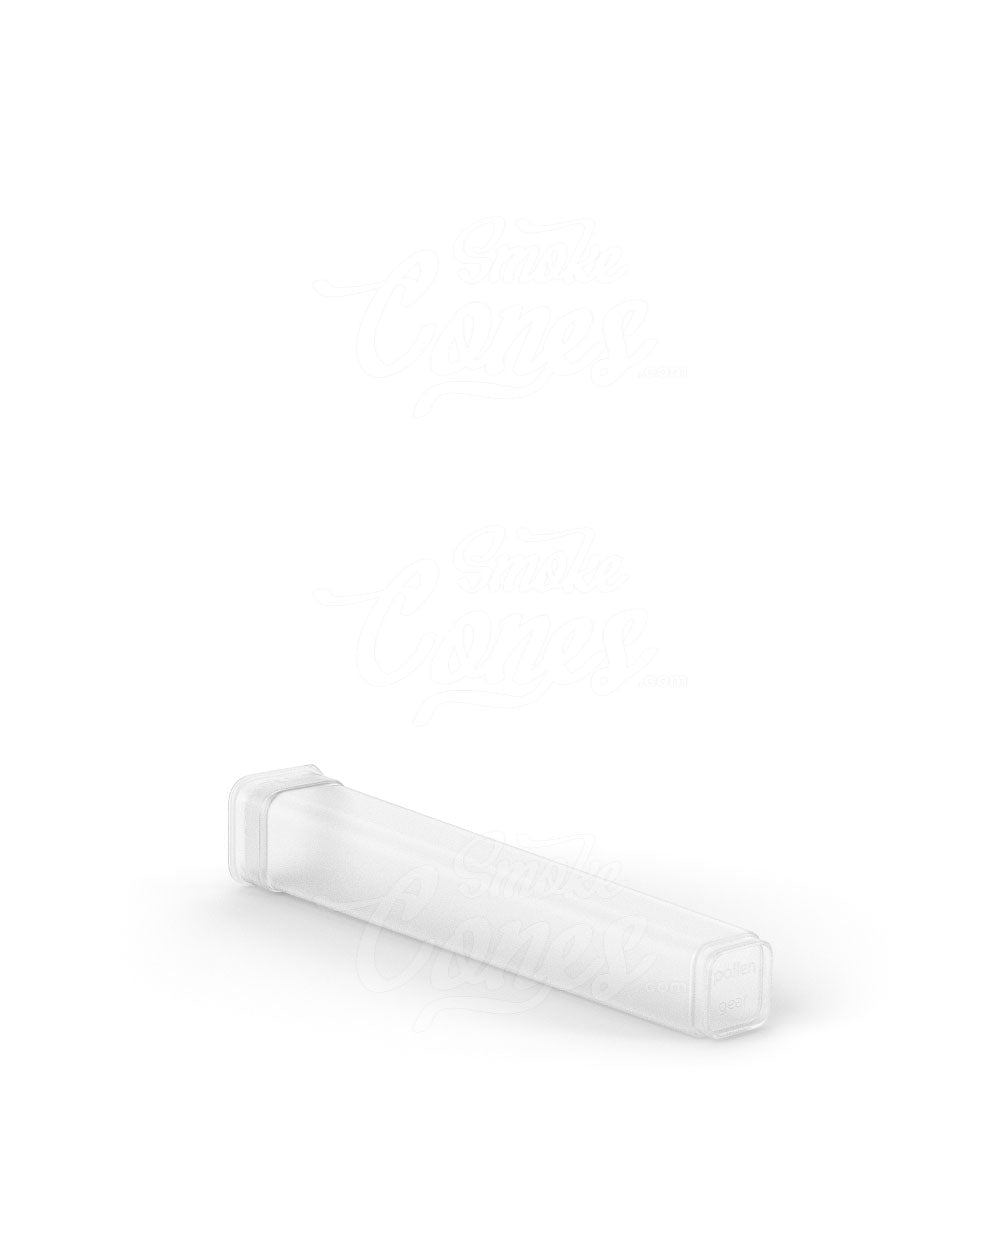 119mm Child Resistant King Size Sustainable Pop Box Pop Top Clear Plastic Pre-Roll Tubes 1840/Box